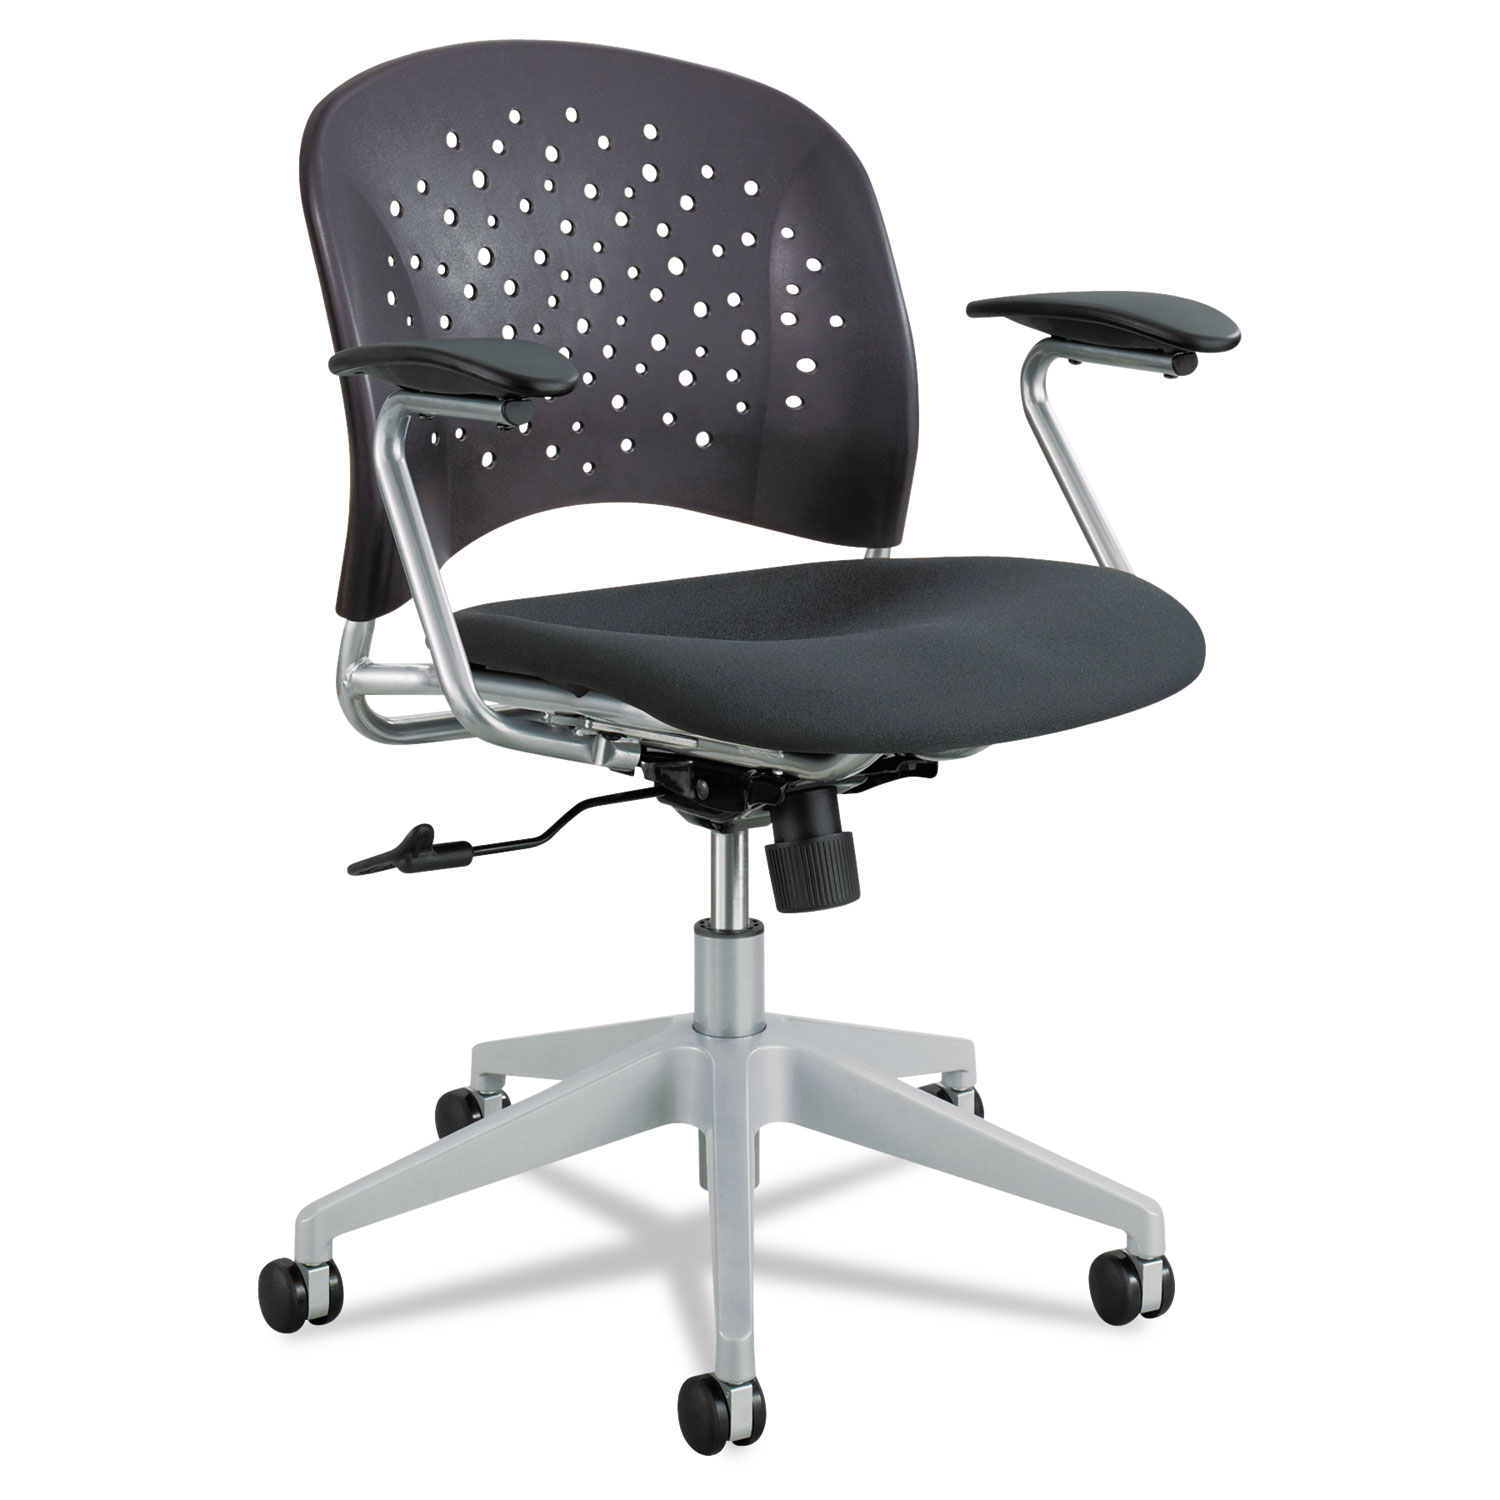 Rve Series Task Chair, Round Plastic Back, Polyester Seat, Black Seat/Back